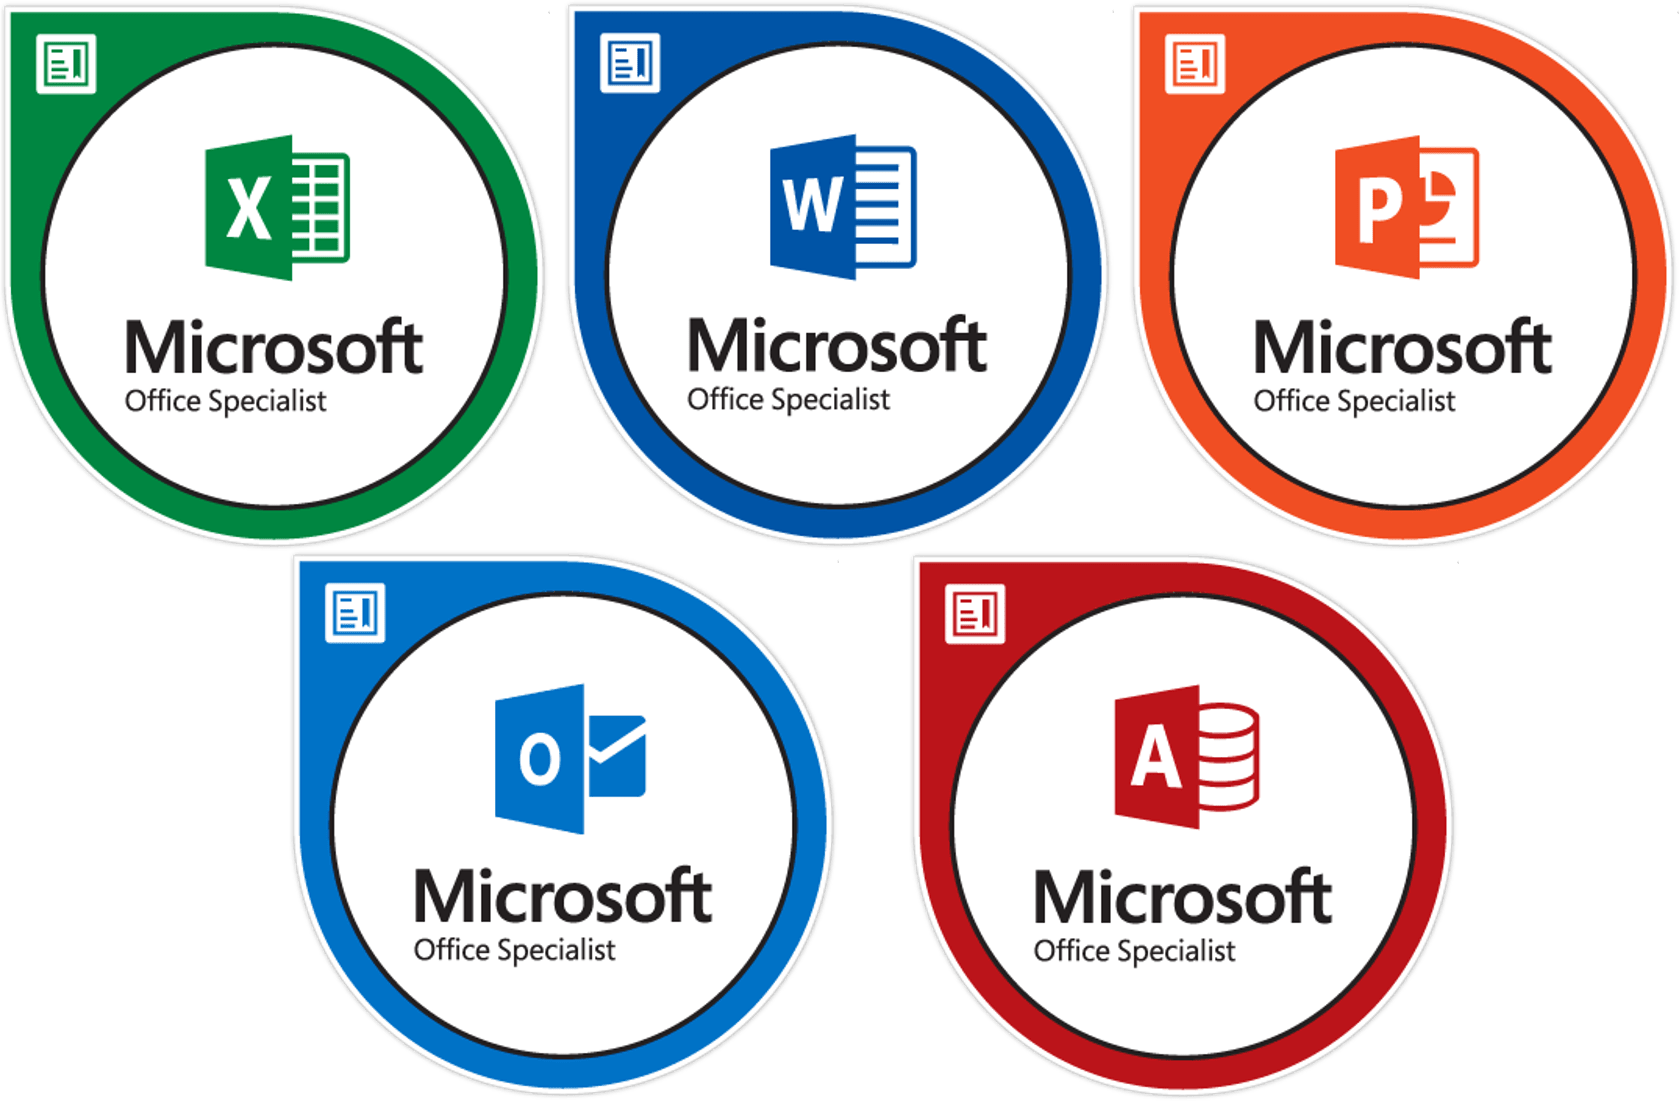 MO-300 – Microsoft PowerPoint (PowerPoint and PowerPoint 2019)